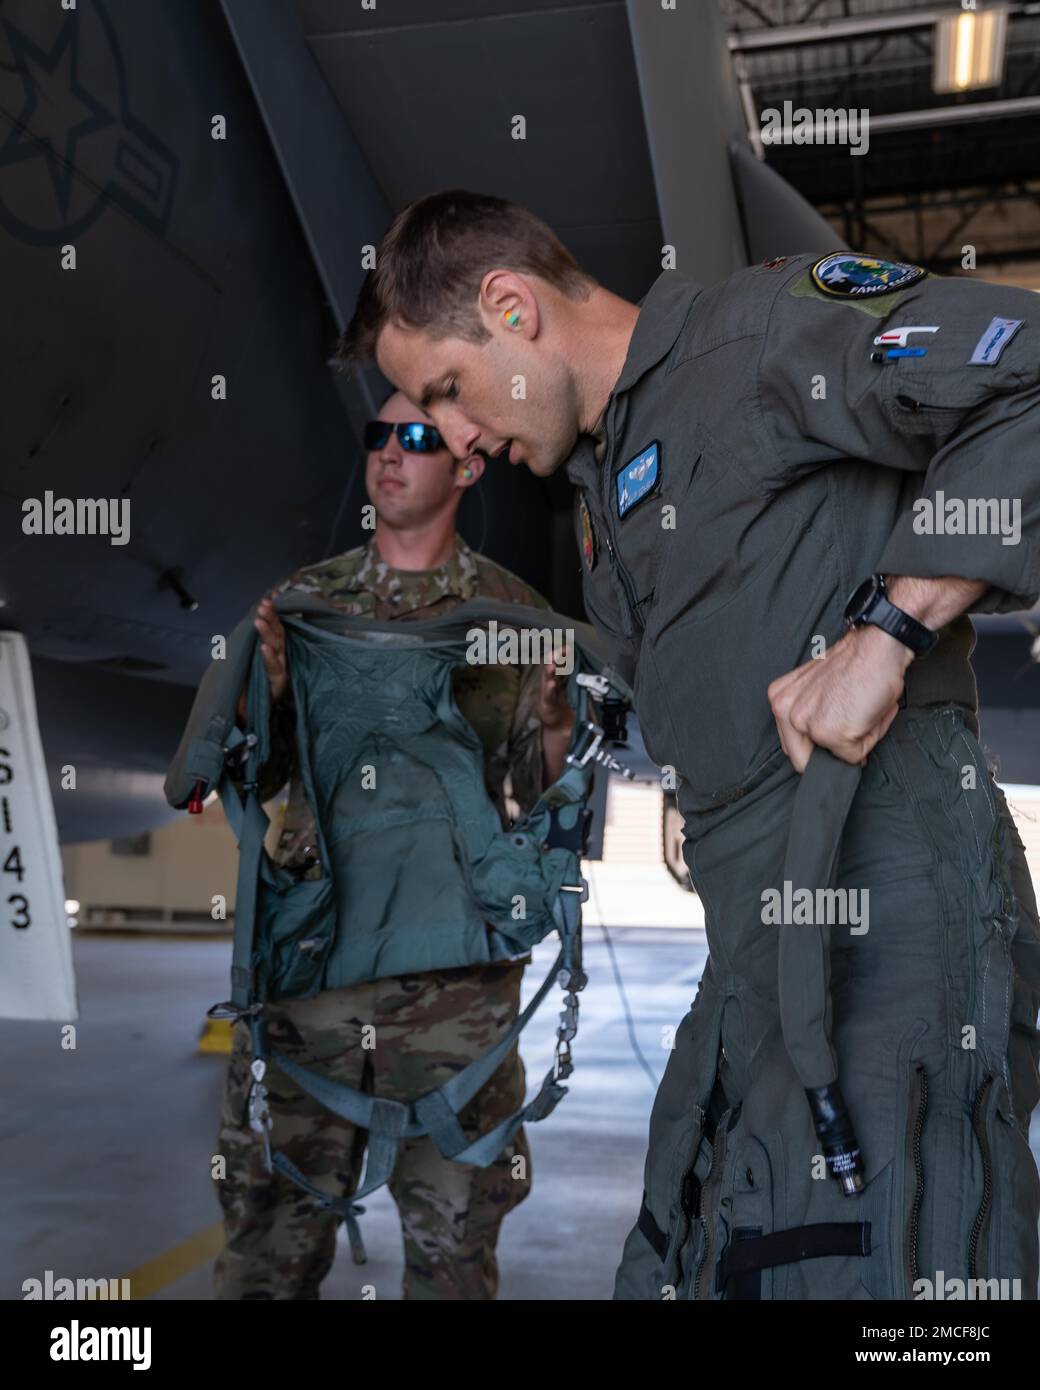 Maj, John McFarlin, Florida Air National Guard's 125th Fighter Wing, Detachment 1, F-15C pilot, finishes putting on the bottom half of his g-suit while Staff Sgt. Jackson Carroll, Florida Air National Guard's 125th Fighter Wing, Detachment 1, crew chief, stands ready with the top half of the g-suit at Homestead Air Reserve Base, Florida in support of North American Aerospace Defense Command's (NORAD) Operation Noble Defender (OND), June 30, 2022. As a part of OND, a routine operation, the Continental U.S. NORAD Region (CONR) coordinated and conducted joint operations with the U.S. Navy while c Stock Photo